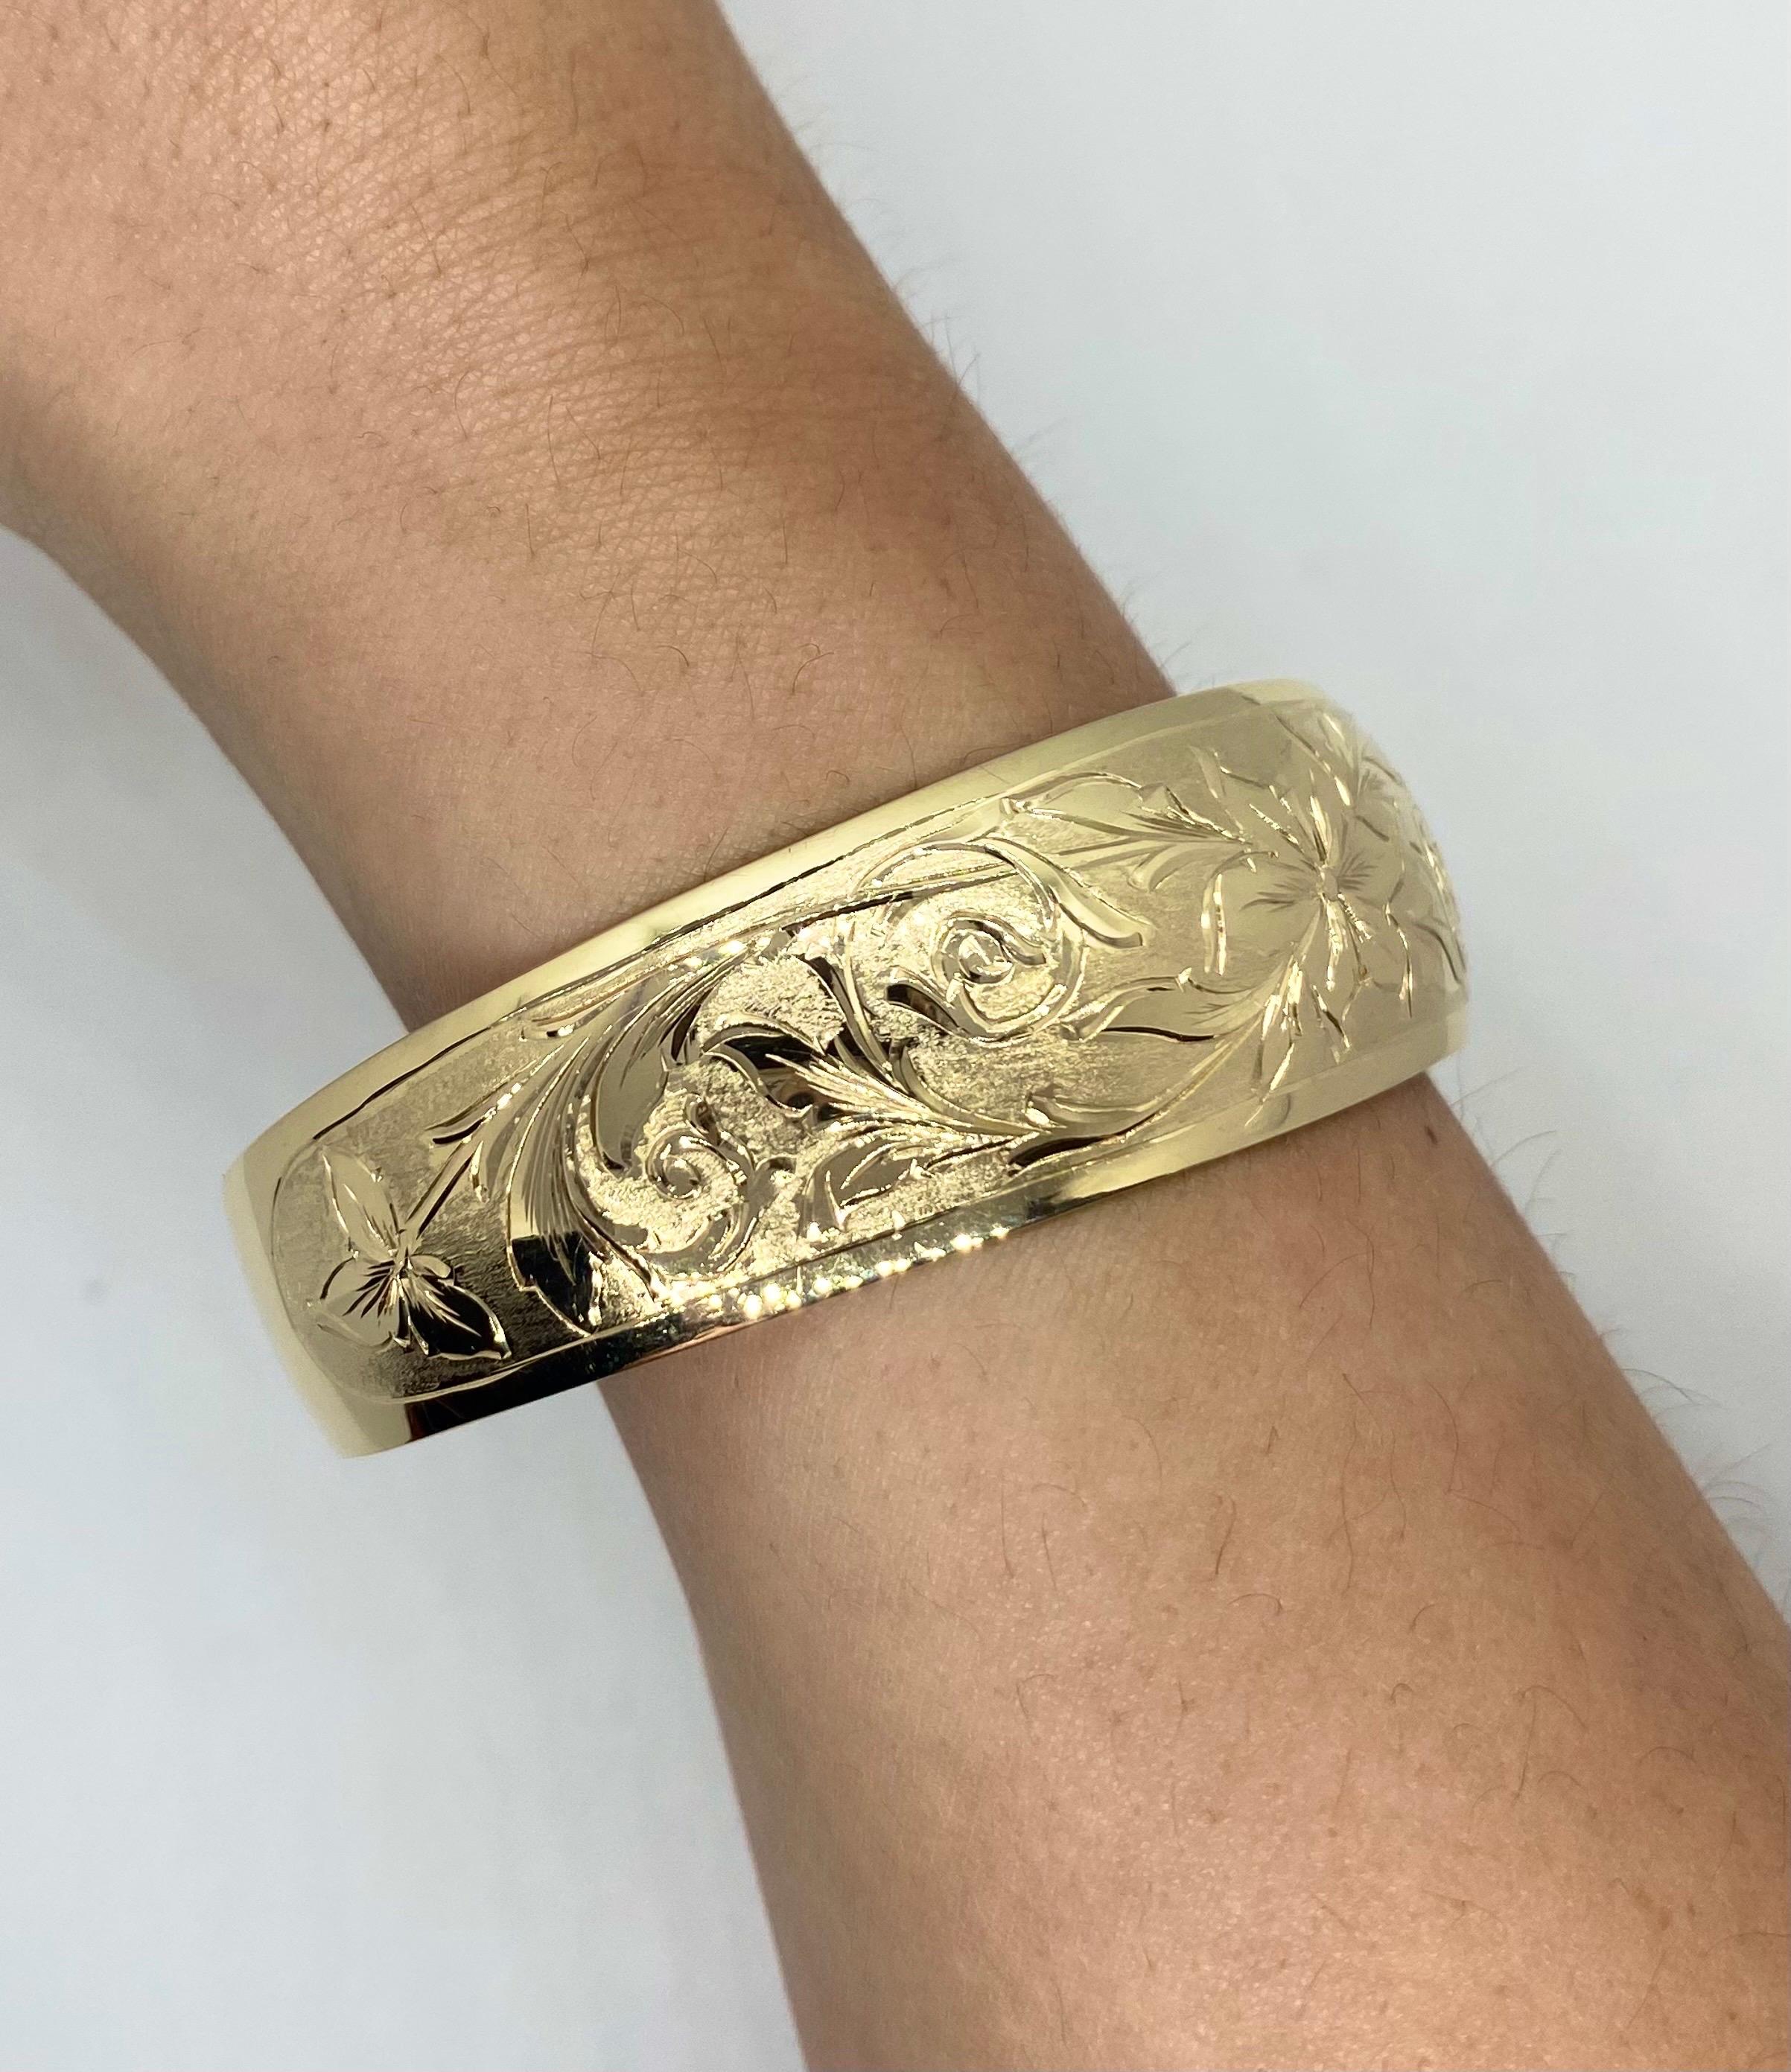 Vintage 1990’s 14k Yellow Gold Hand Engraved Wide Cuff Bangle Bracelet In Excellent Condition For Sale In Boston, MA